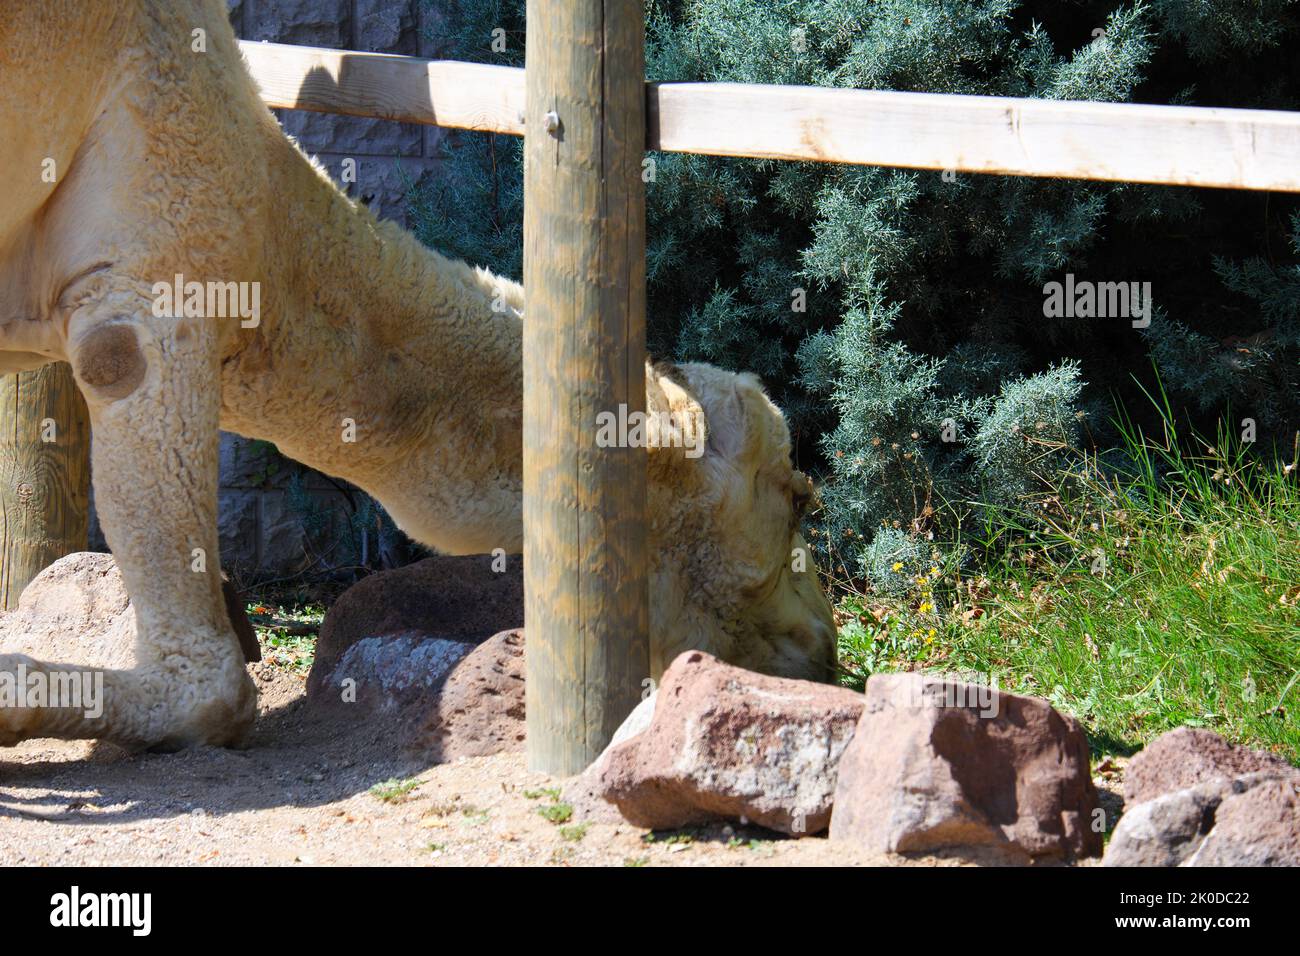 Dromedary -Camelus Dromederius- Arabian Camel at zoo eating leaves and grass Stock Photo